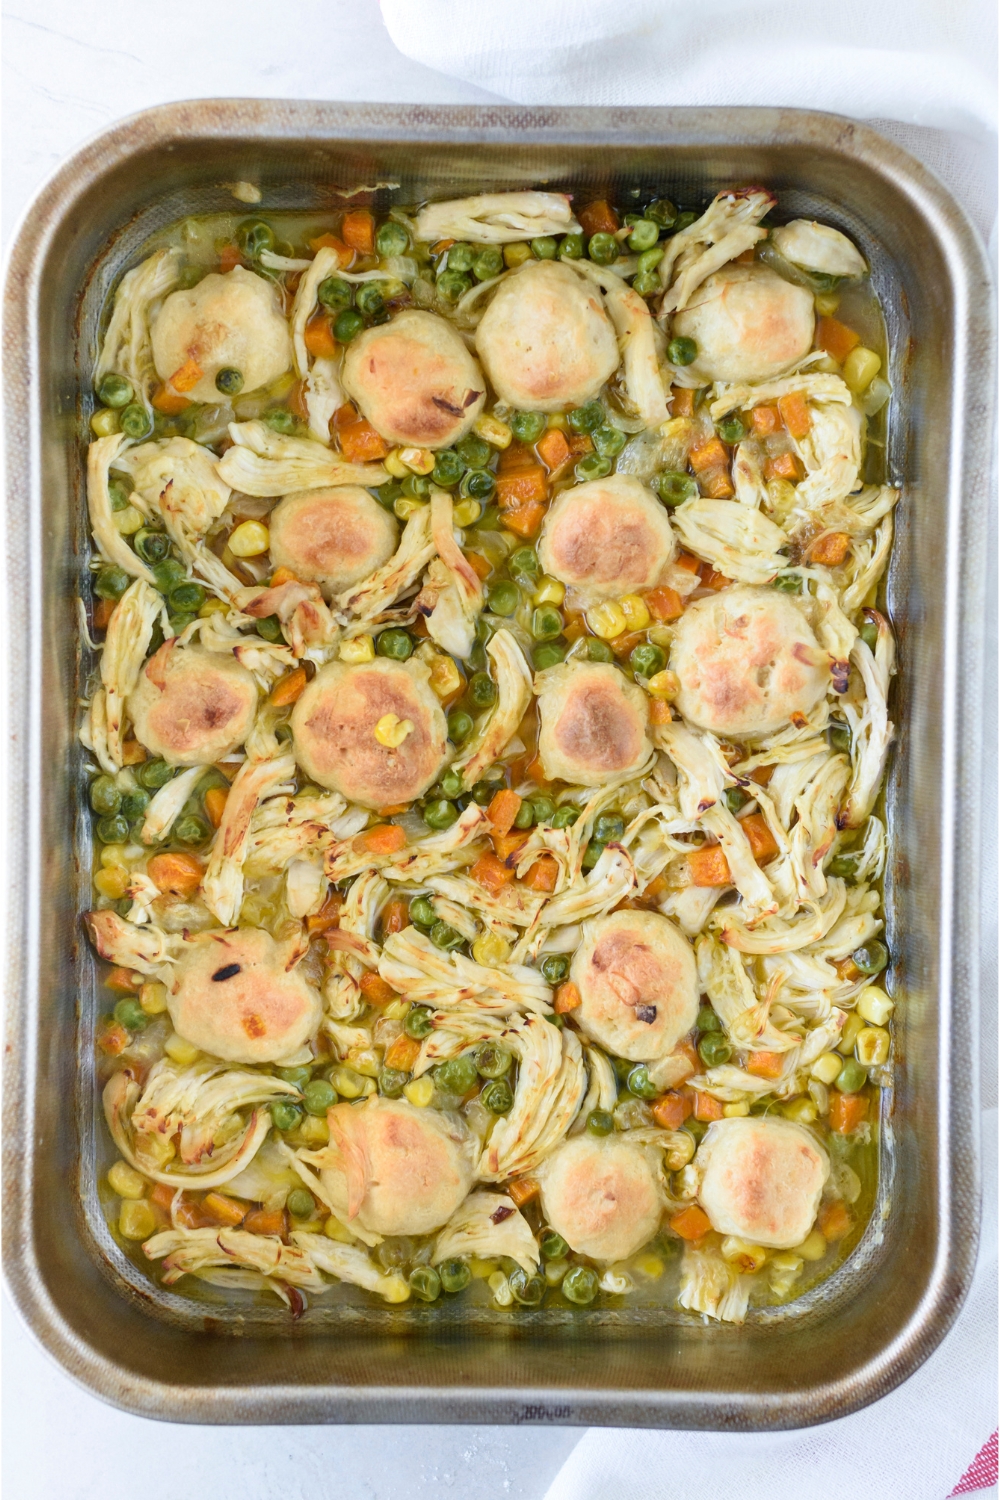 A baking dish filled with freshly baked and shredded chicken mixed with cooked veggies and dumplings on top.